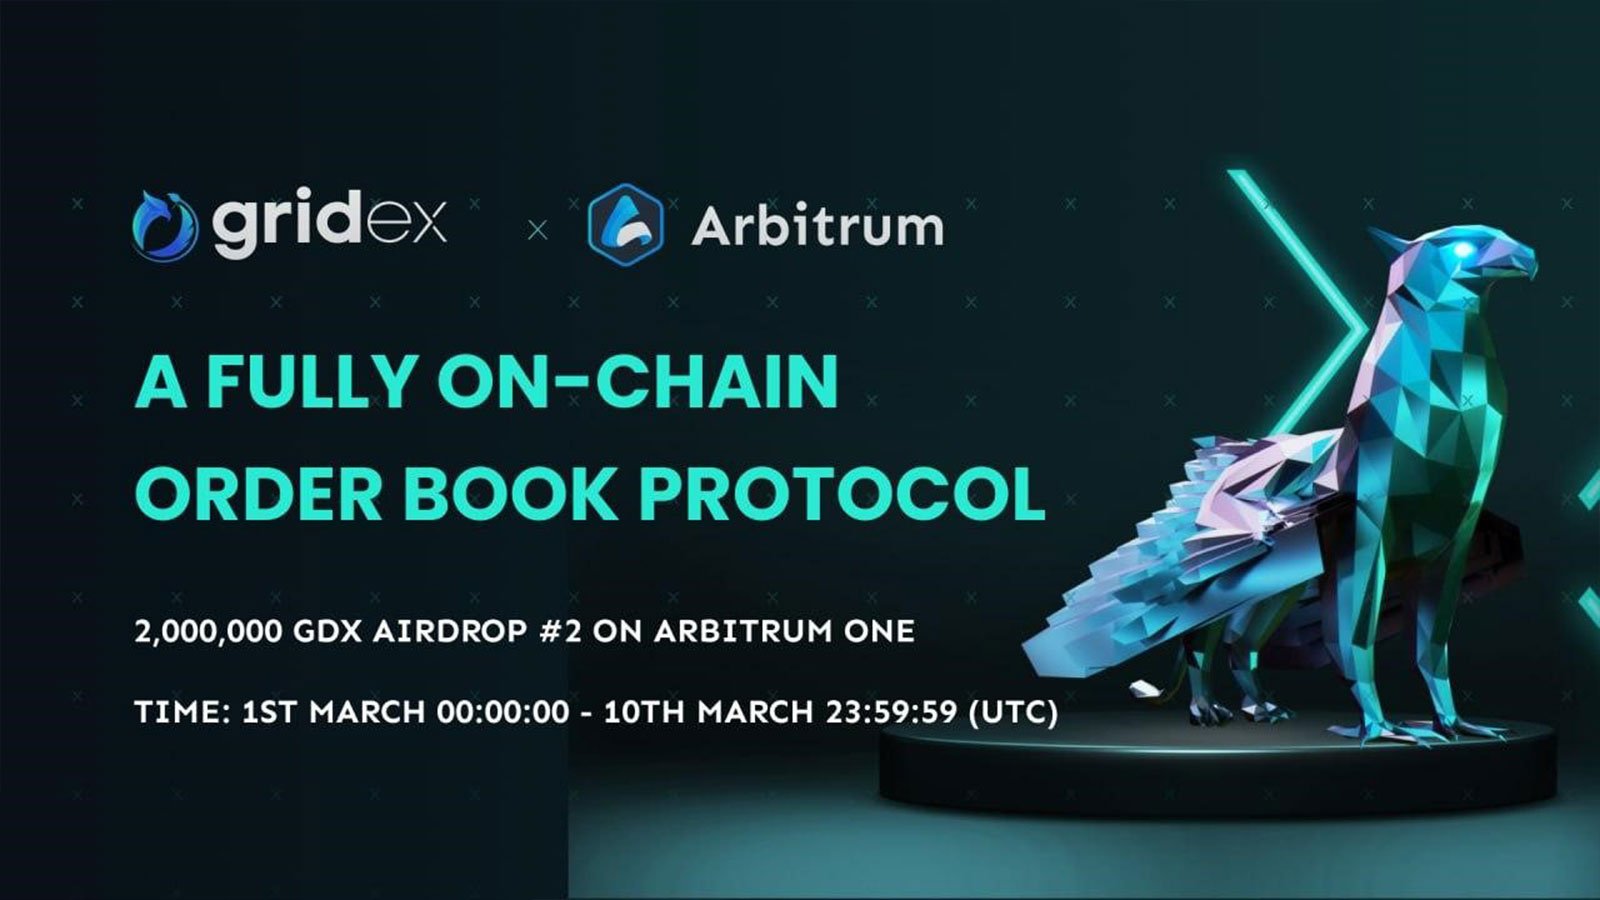 Gridex Protocol Launches on Arbitrum and Announces Airdrop#2 on 1st March